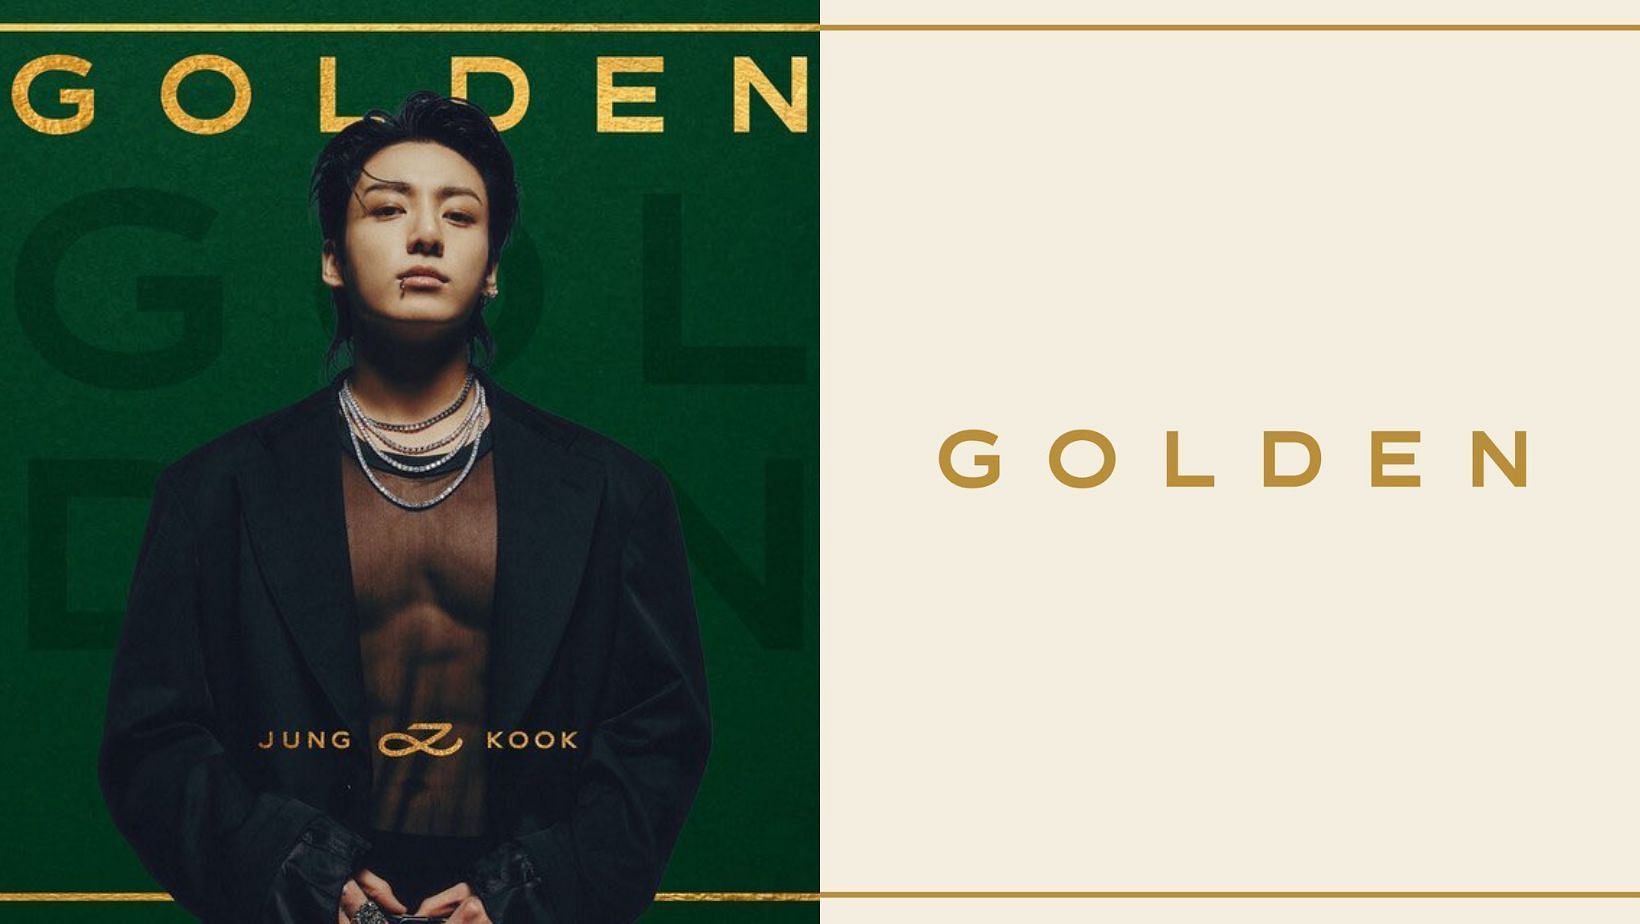 Jungkook's 'Golden' Album Inspired By Johnnie Walker? Here's Why Fans Think  So